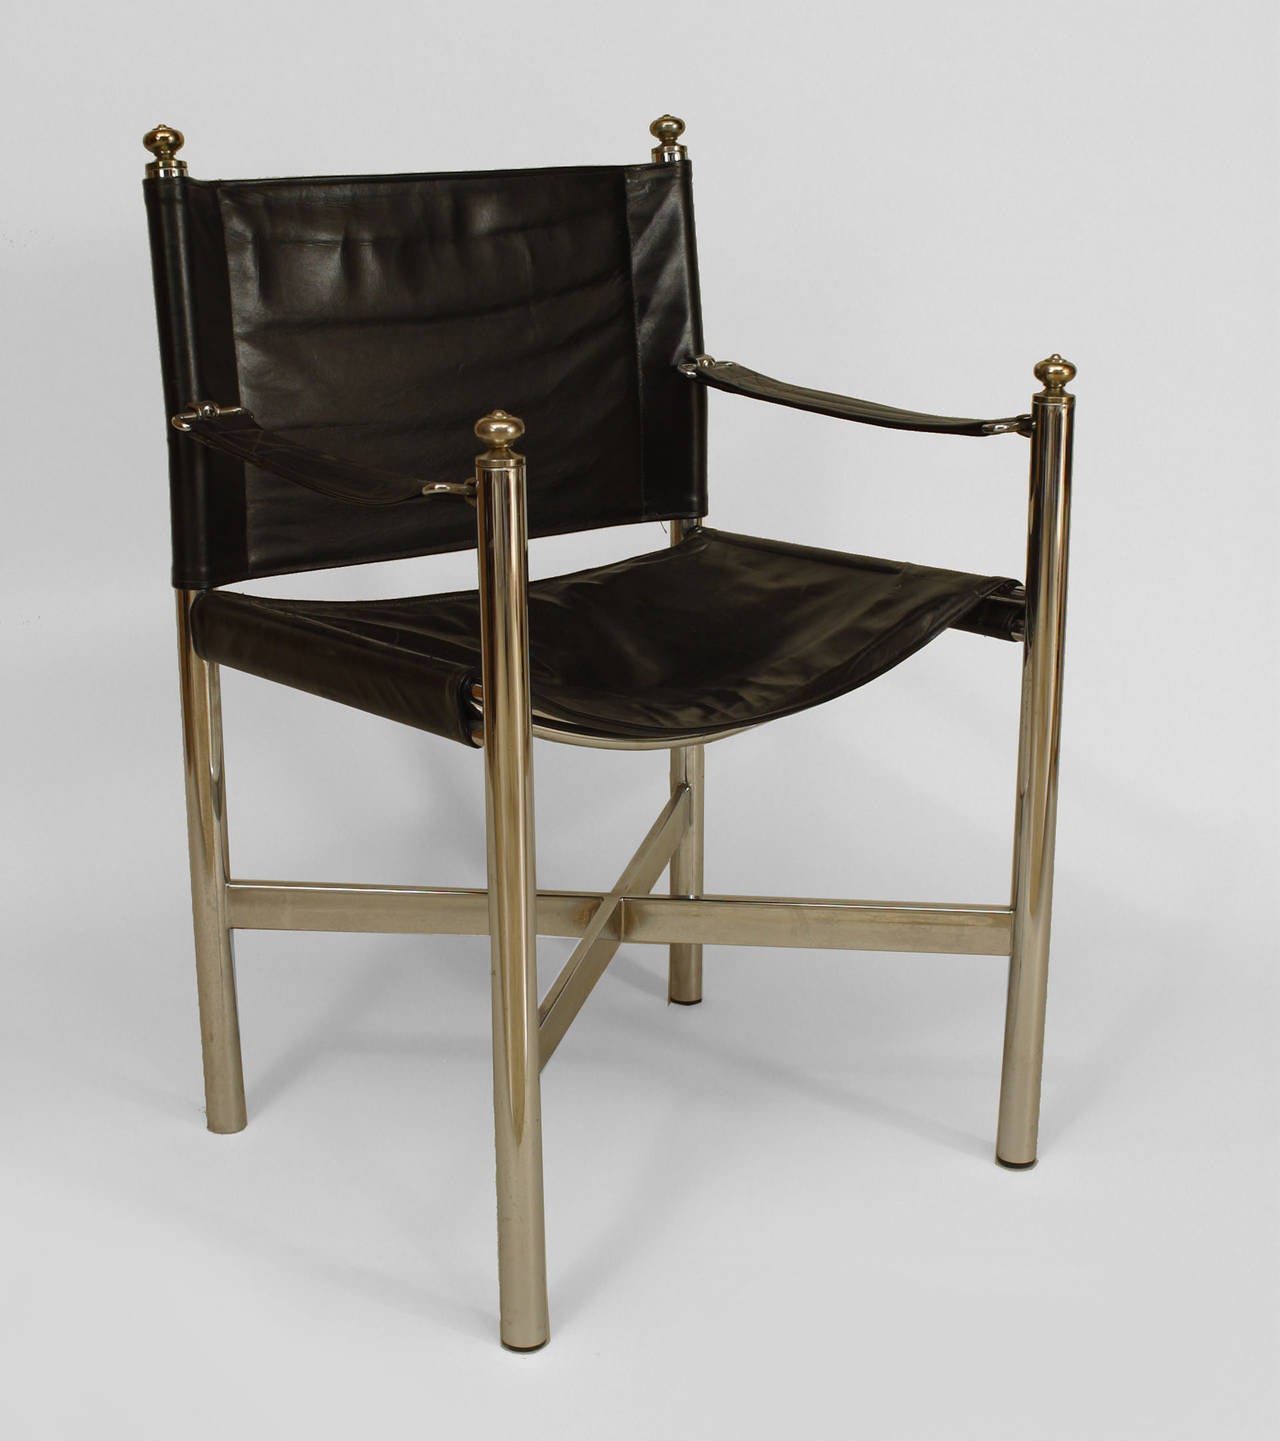 Pair of American Art Moderne chrome framed, brass trimmed arm chairs with
black leather seat, back and arms.